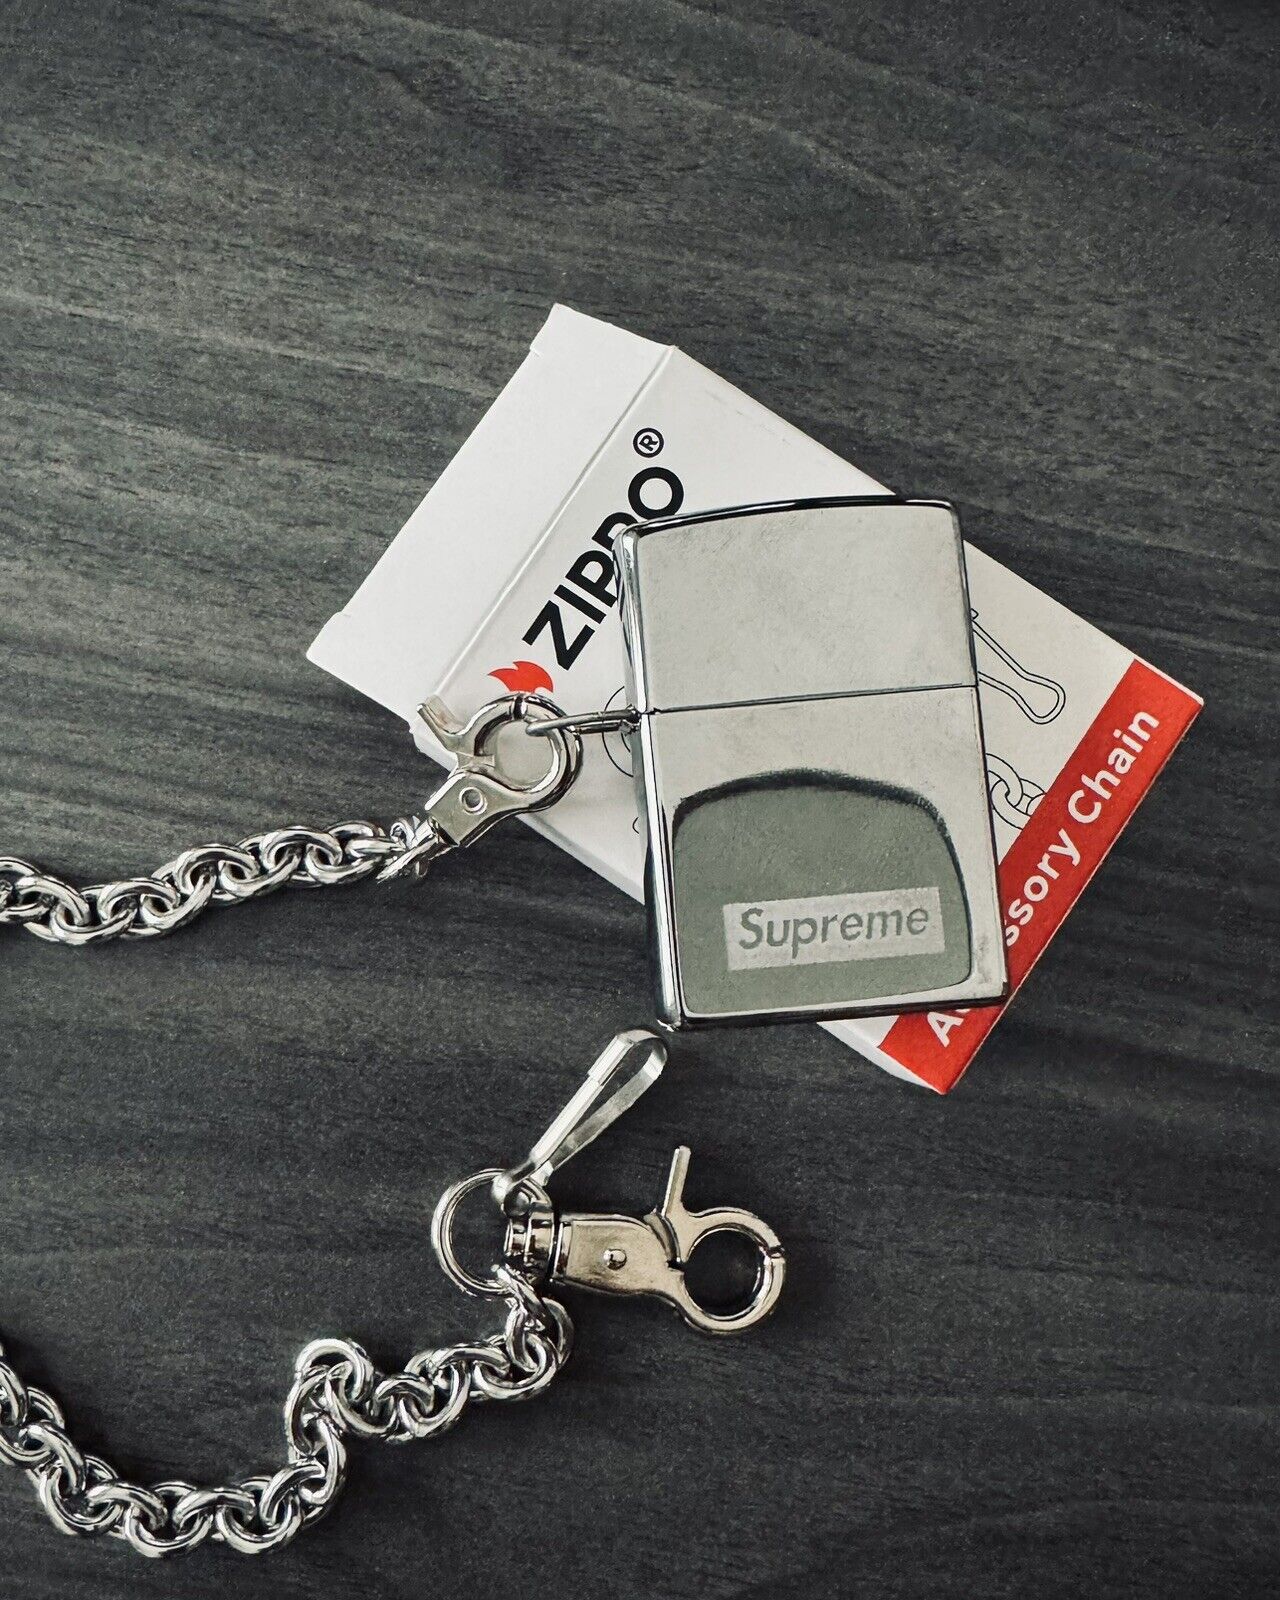 Supreme x Zippo Silver lighter with chain - NEW - with Box